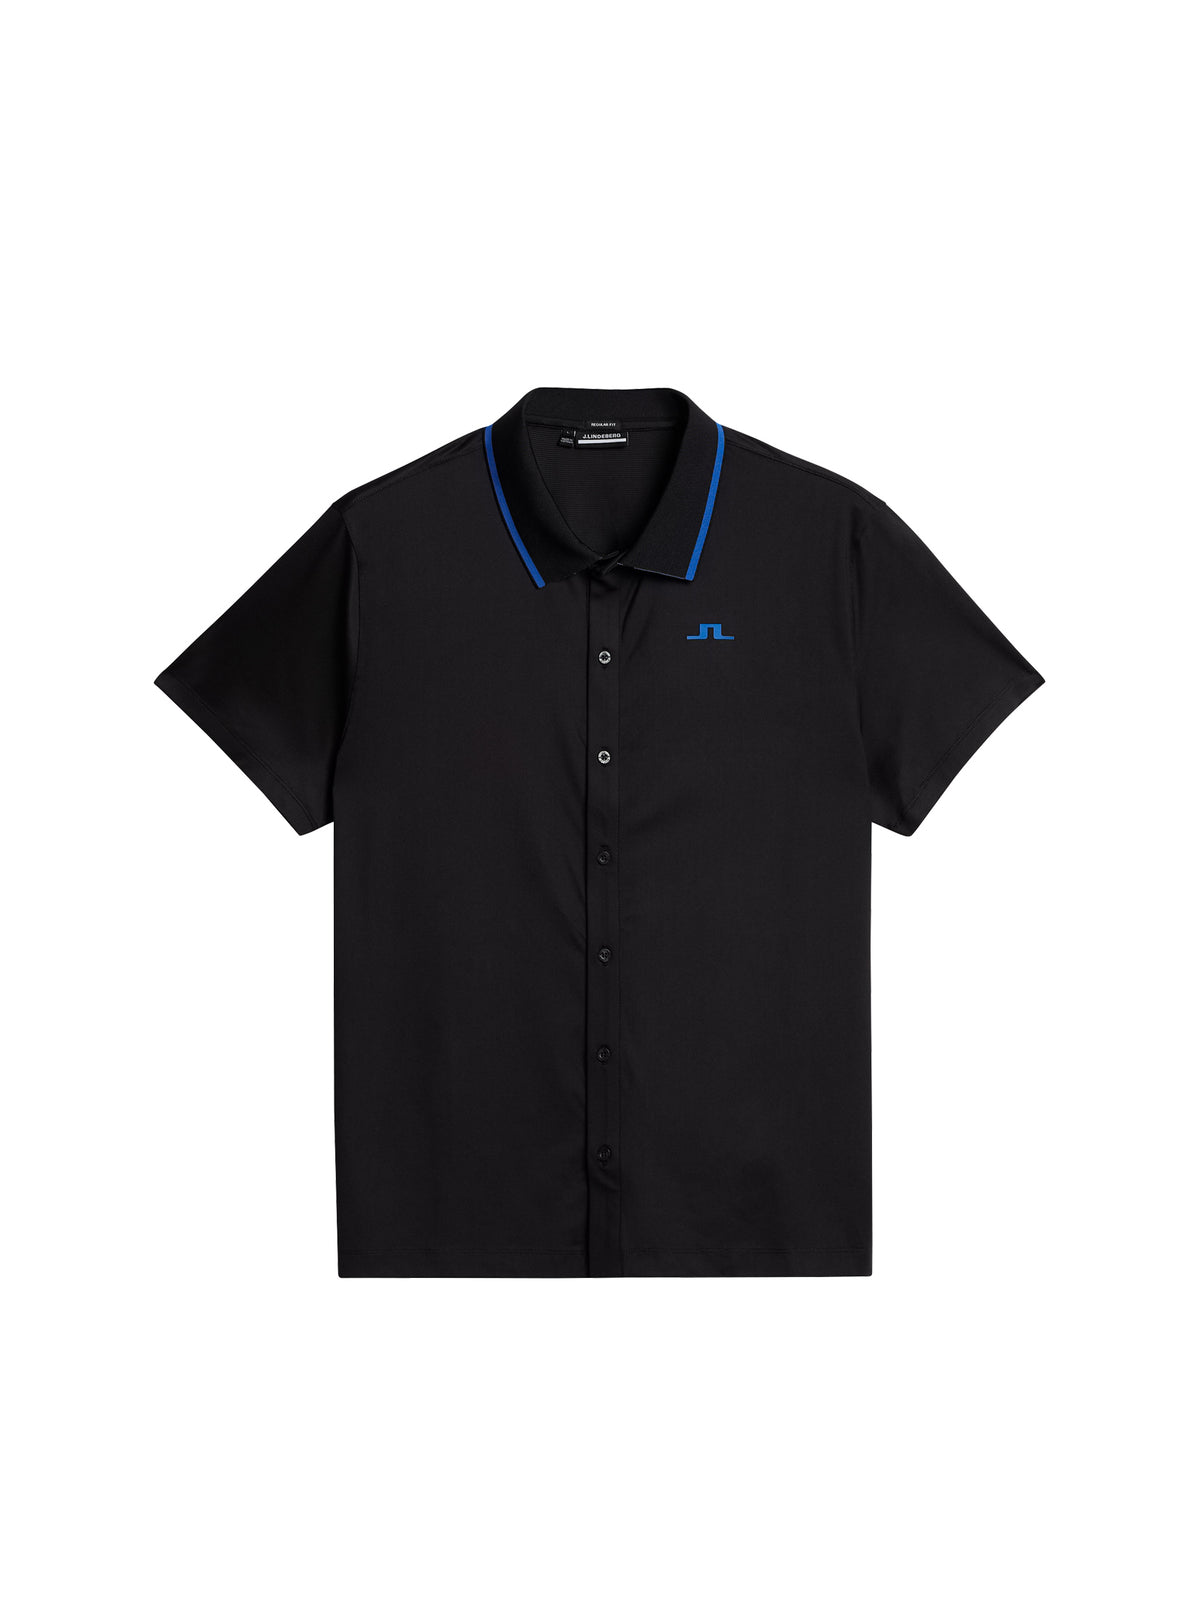 Fryes Regular Fit Polo / Black